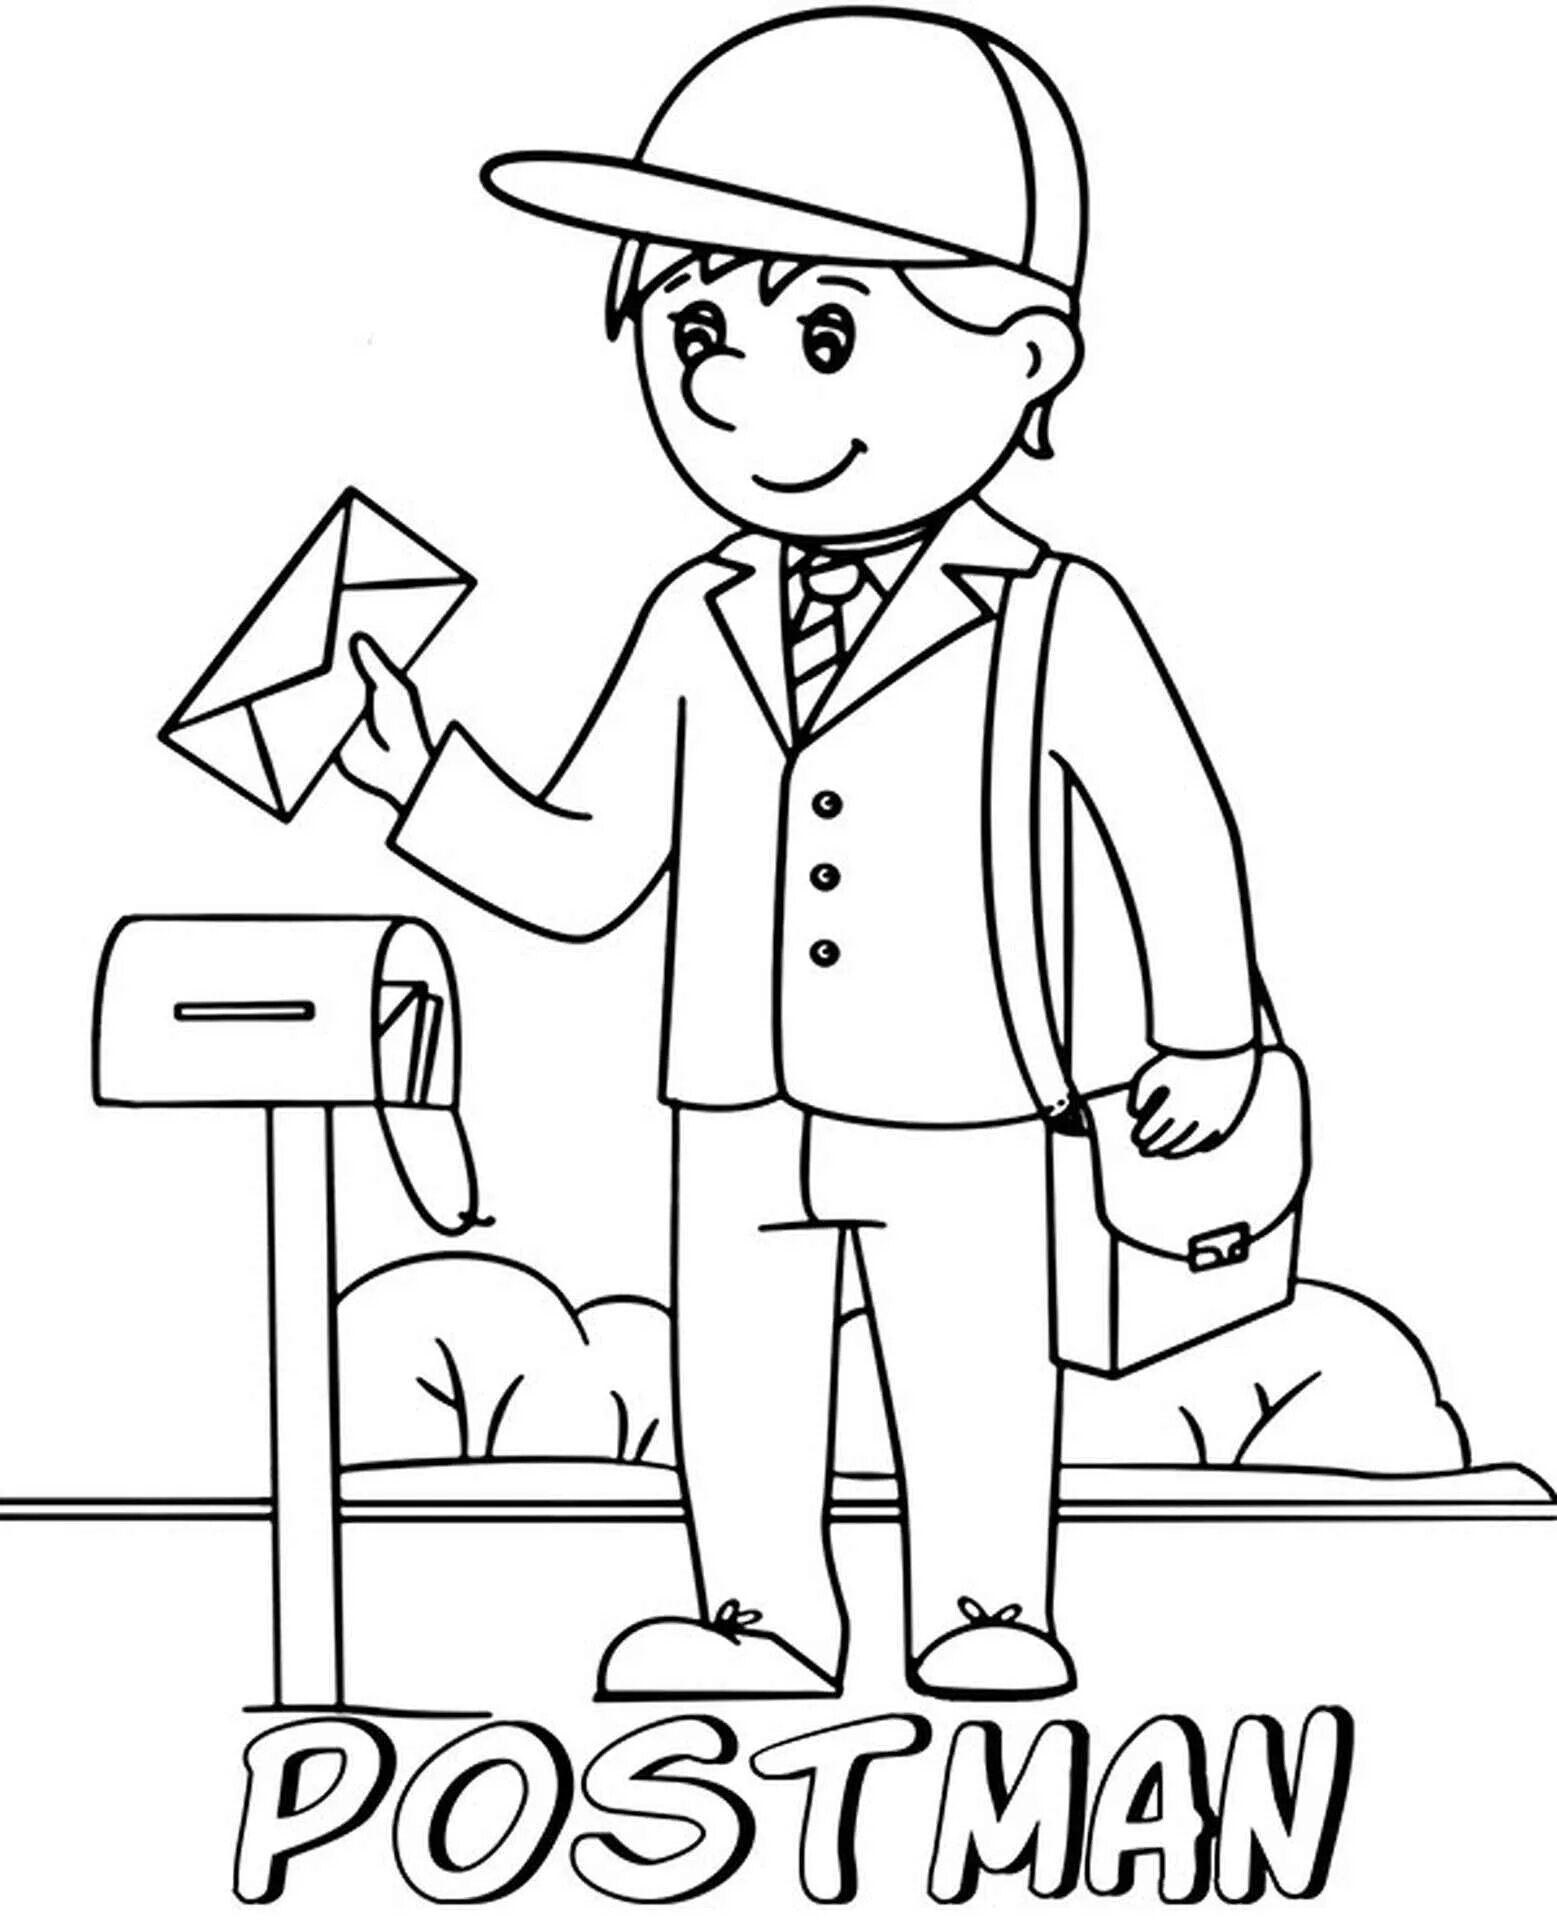 Mail carrier for preschoolers #7